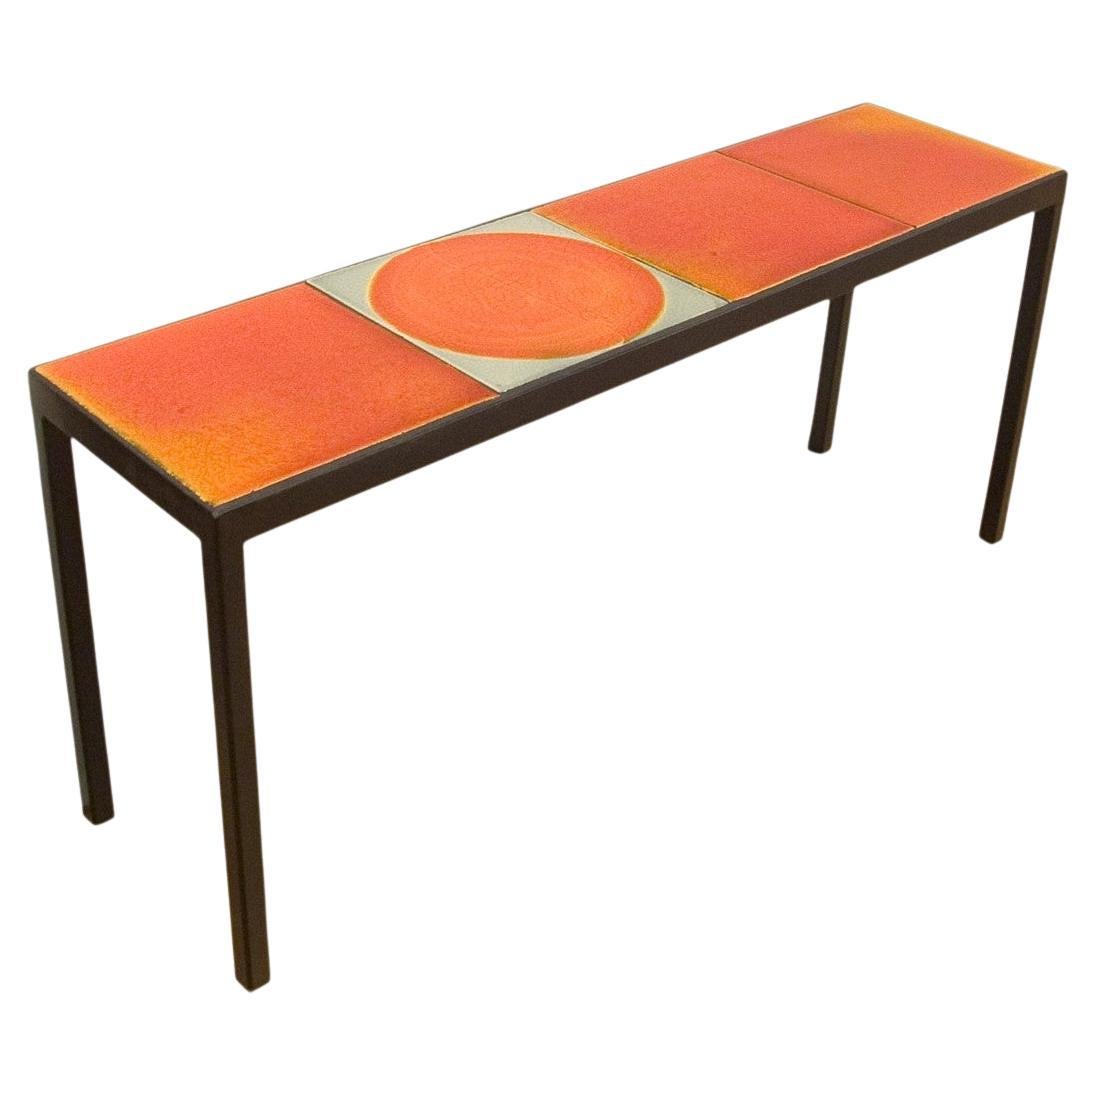 Gueridon Console / Coffee Table with 4 Ceramic Tiles by Roger Capron For Sale